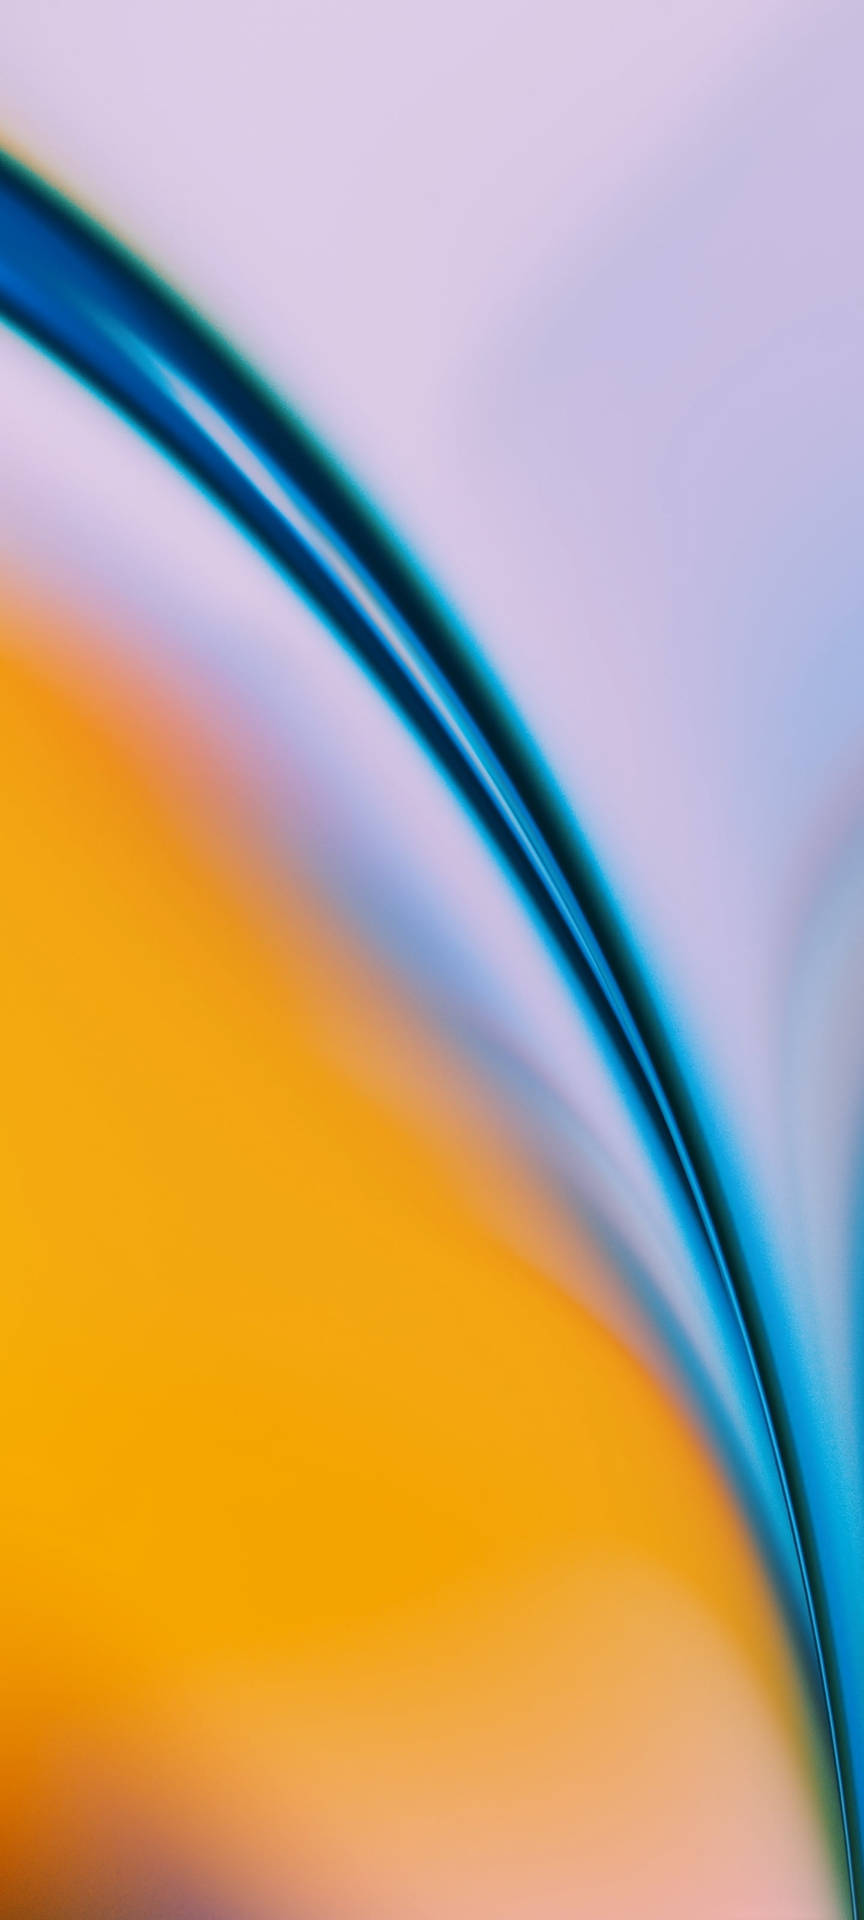 Oneplus Nord Blurred Abstract Background